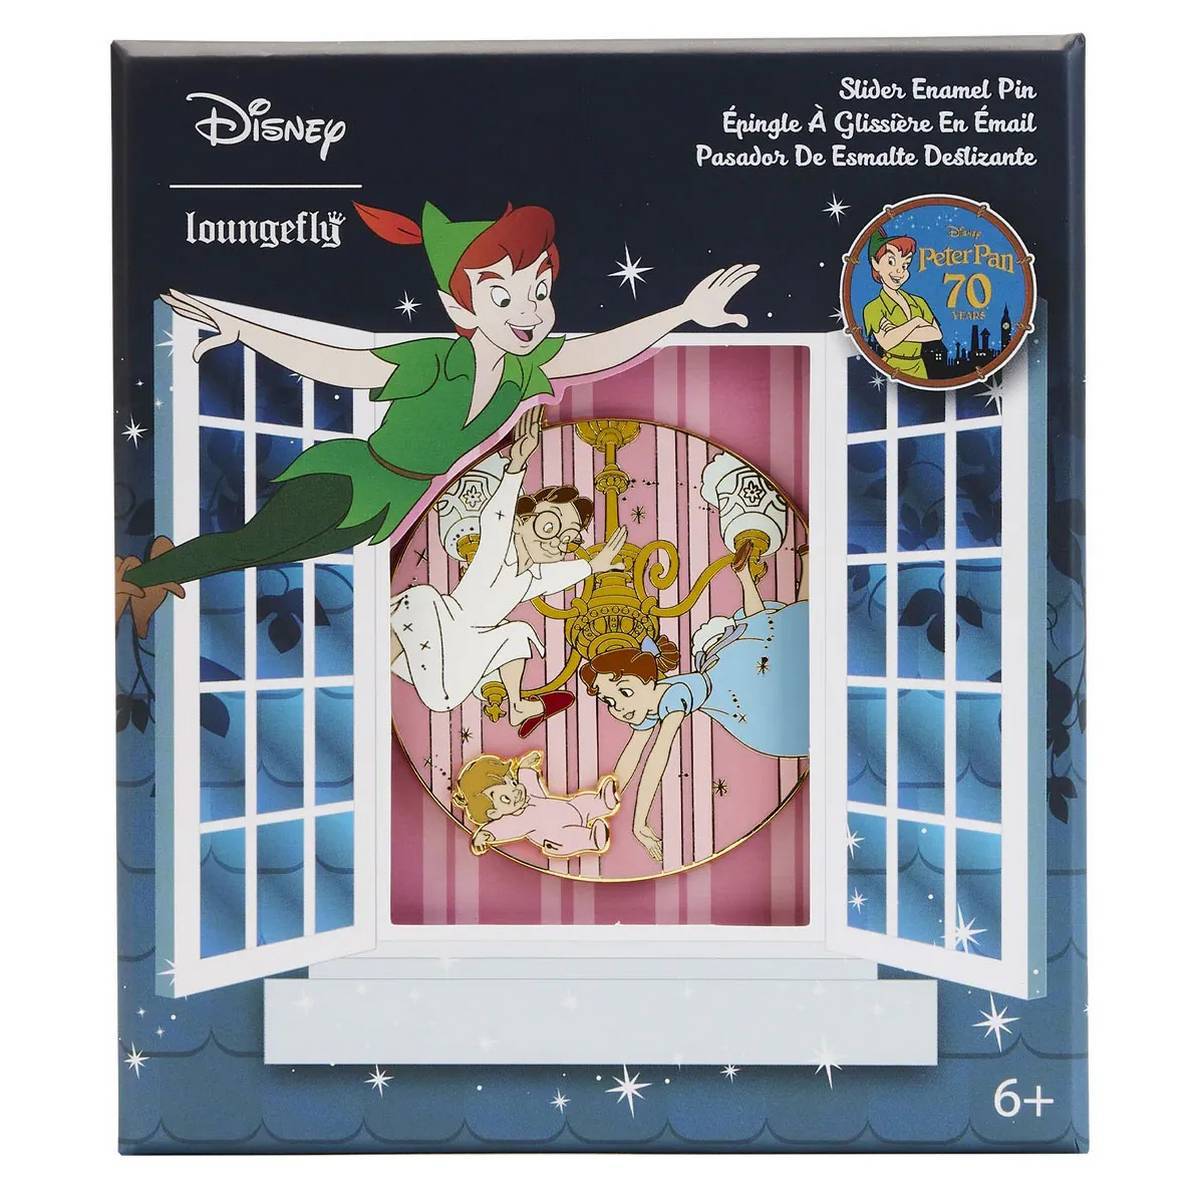 Peter Pan 70th Anniversary You Can Fly Collector Box